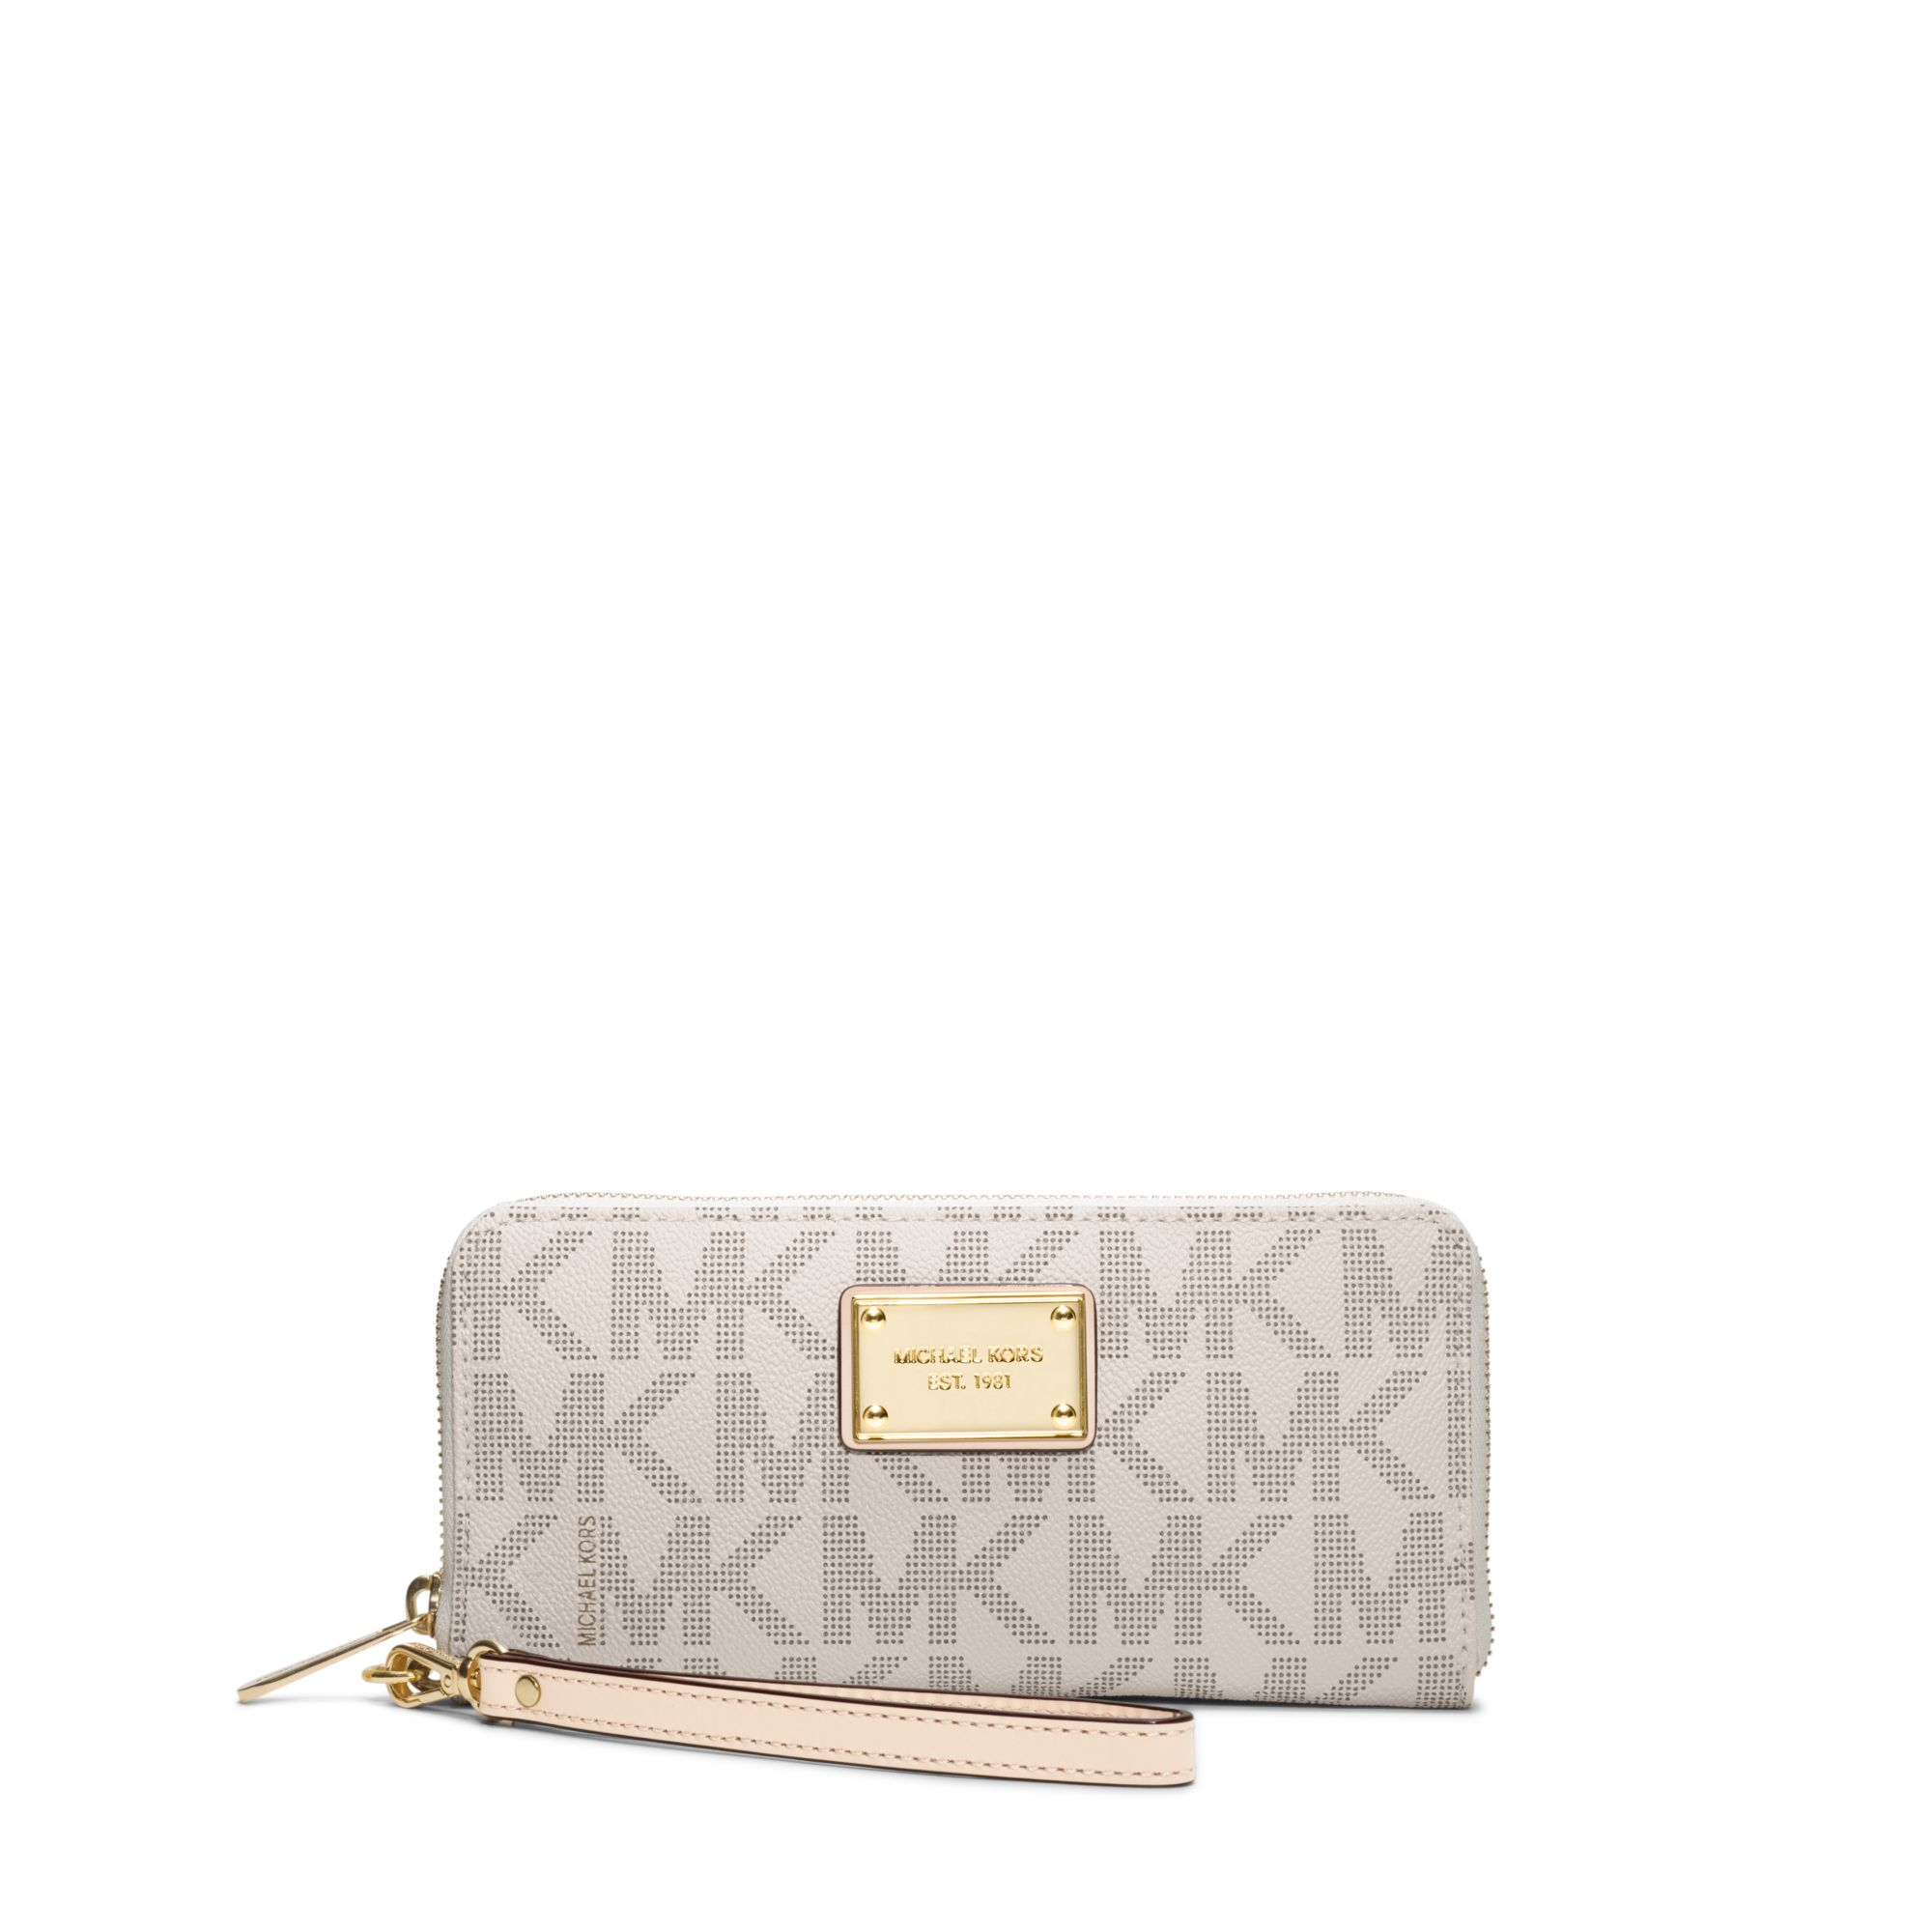 Lyst - Michael Kors Continental Smartphone Wristlet in White